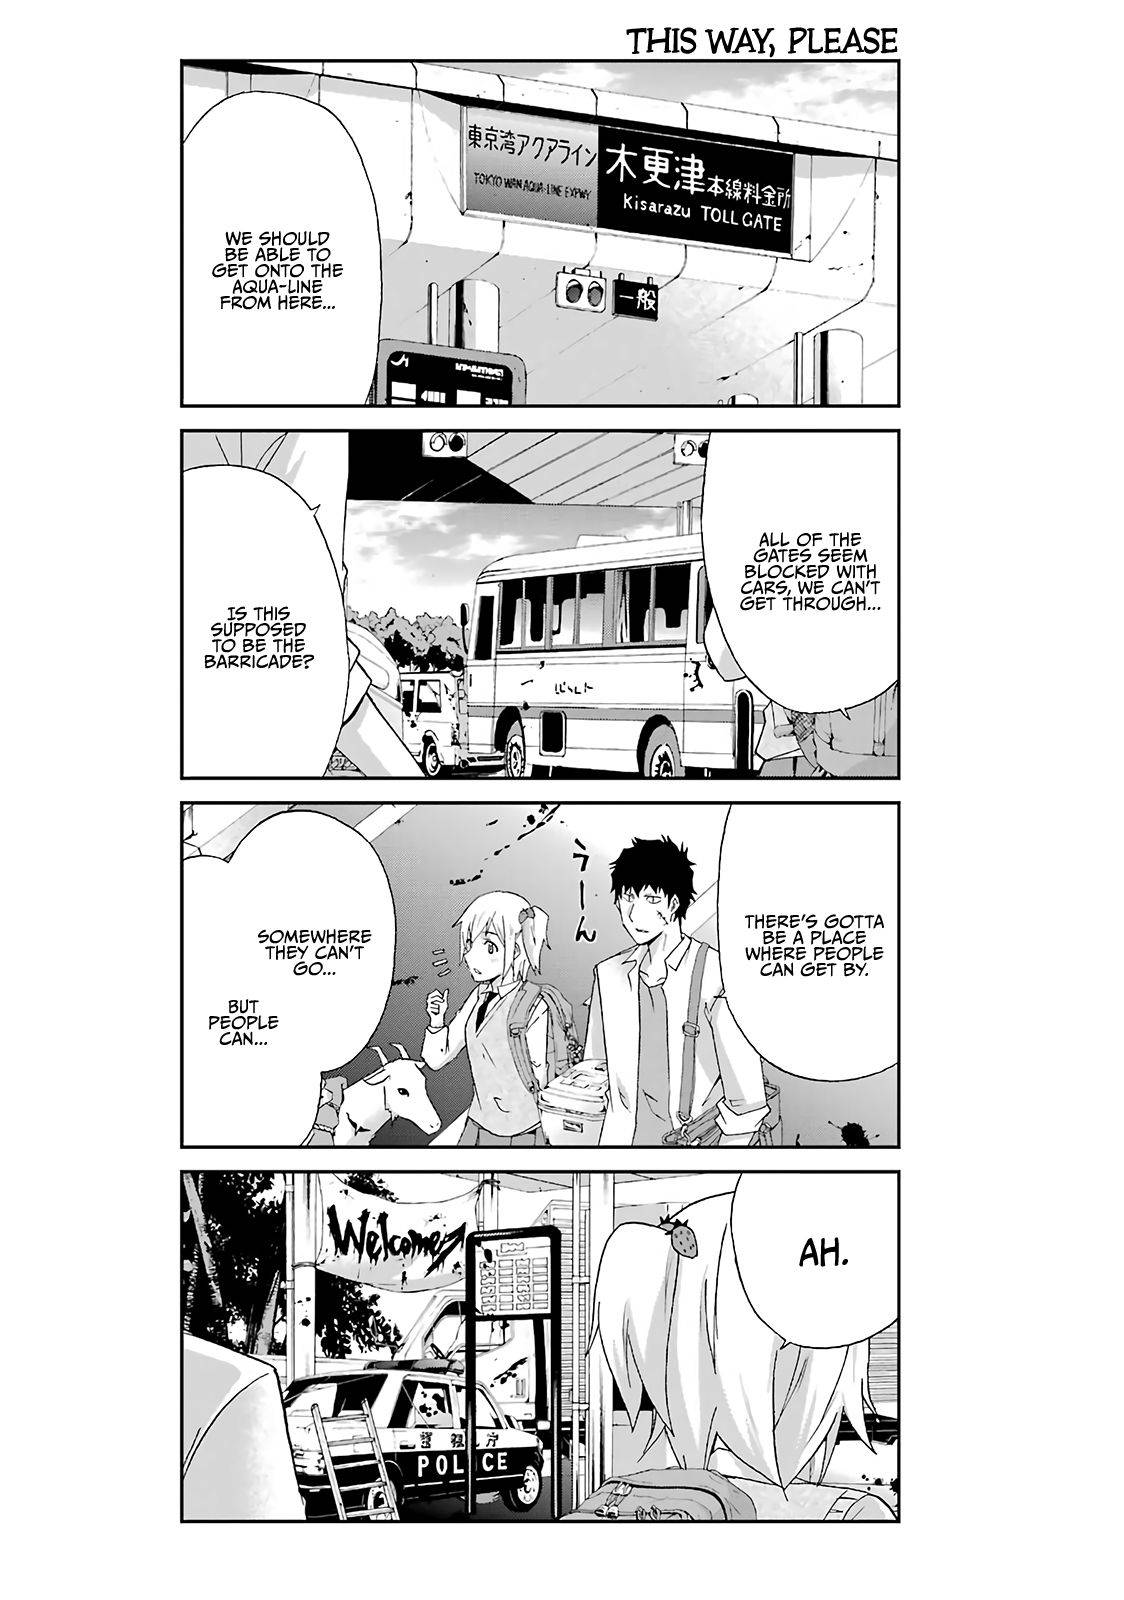 Are You Alive Honda-Kun? - chapter 8 - #2